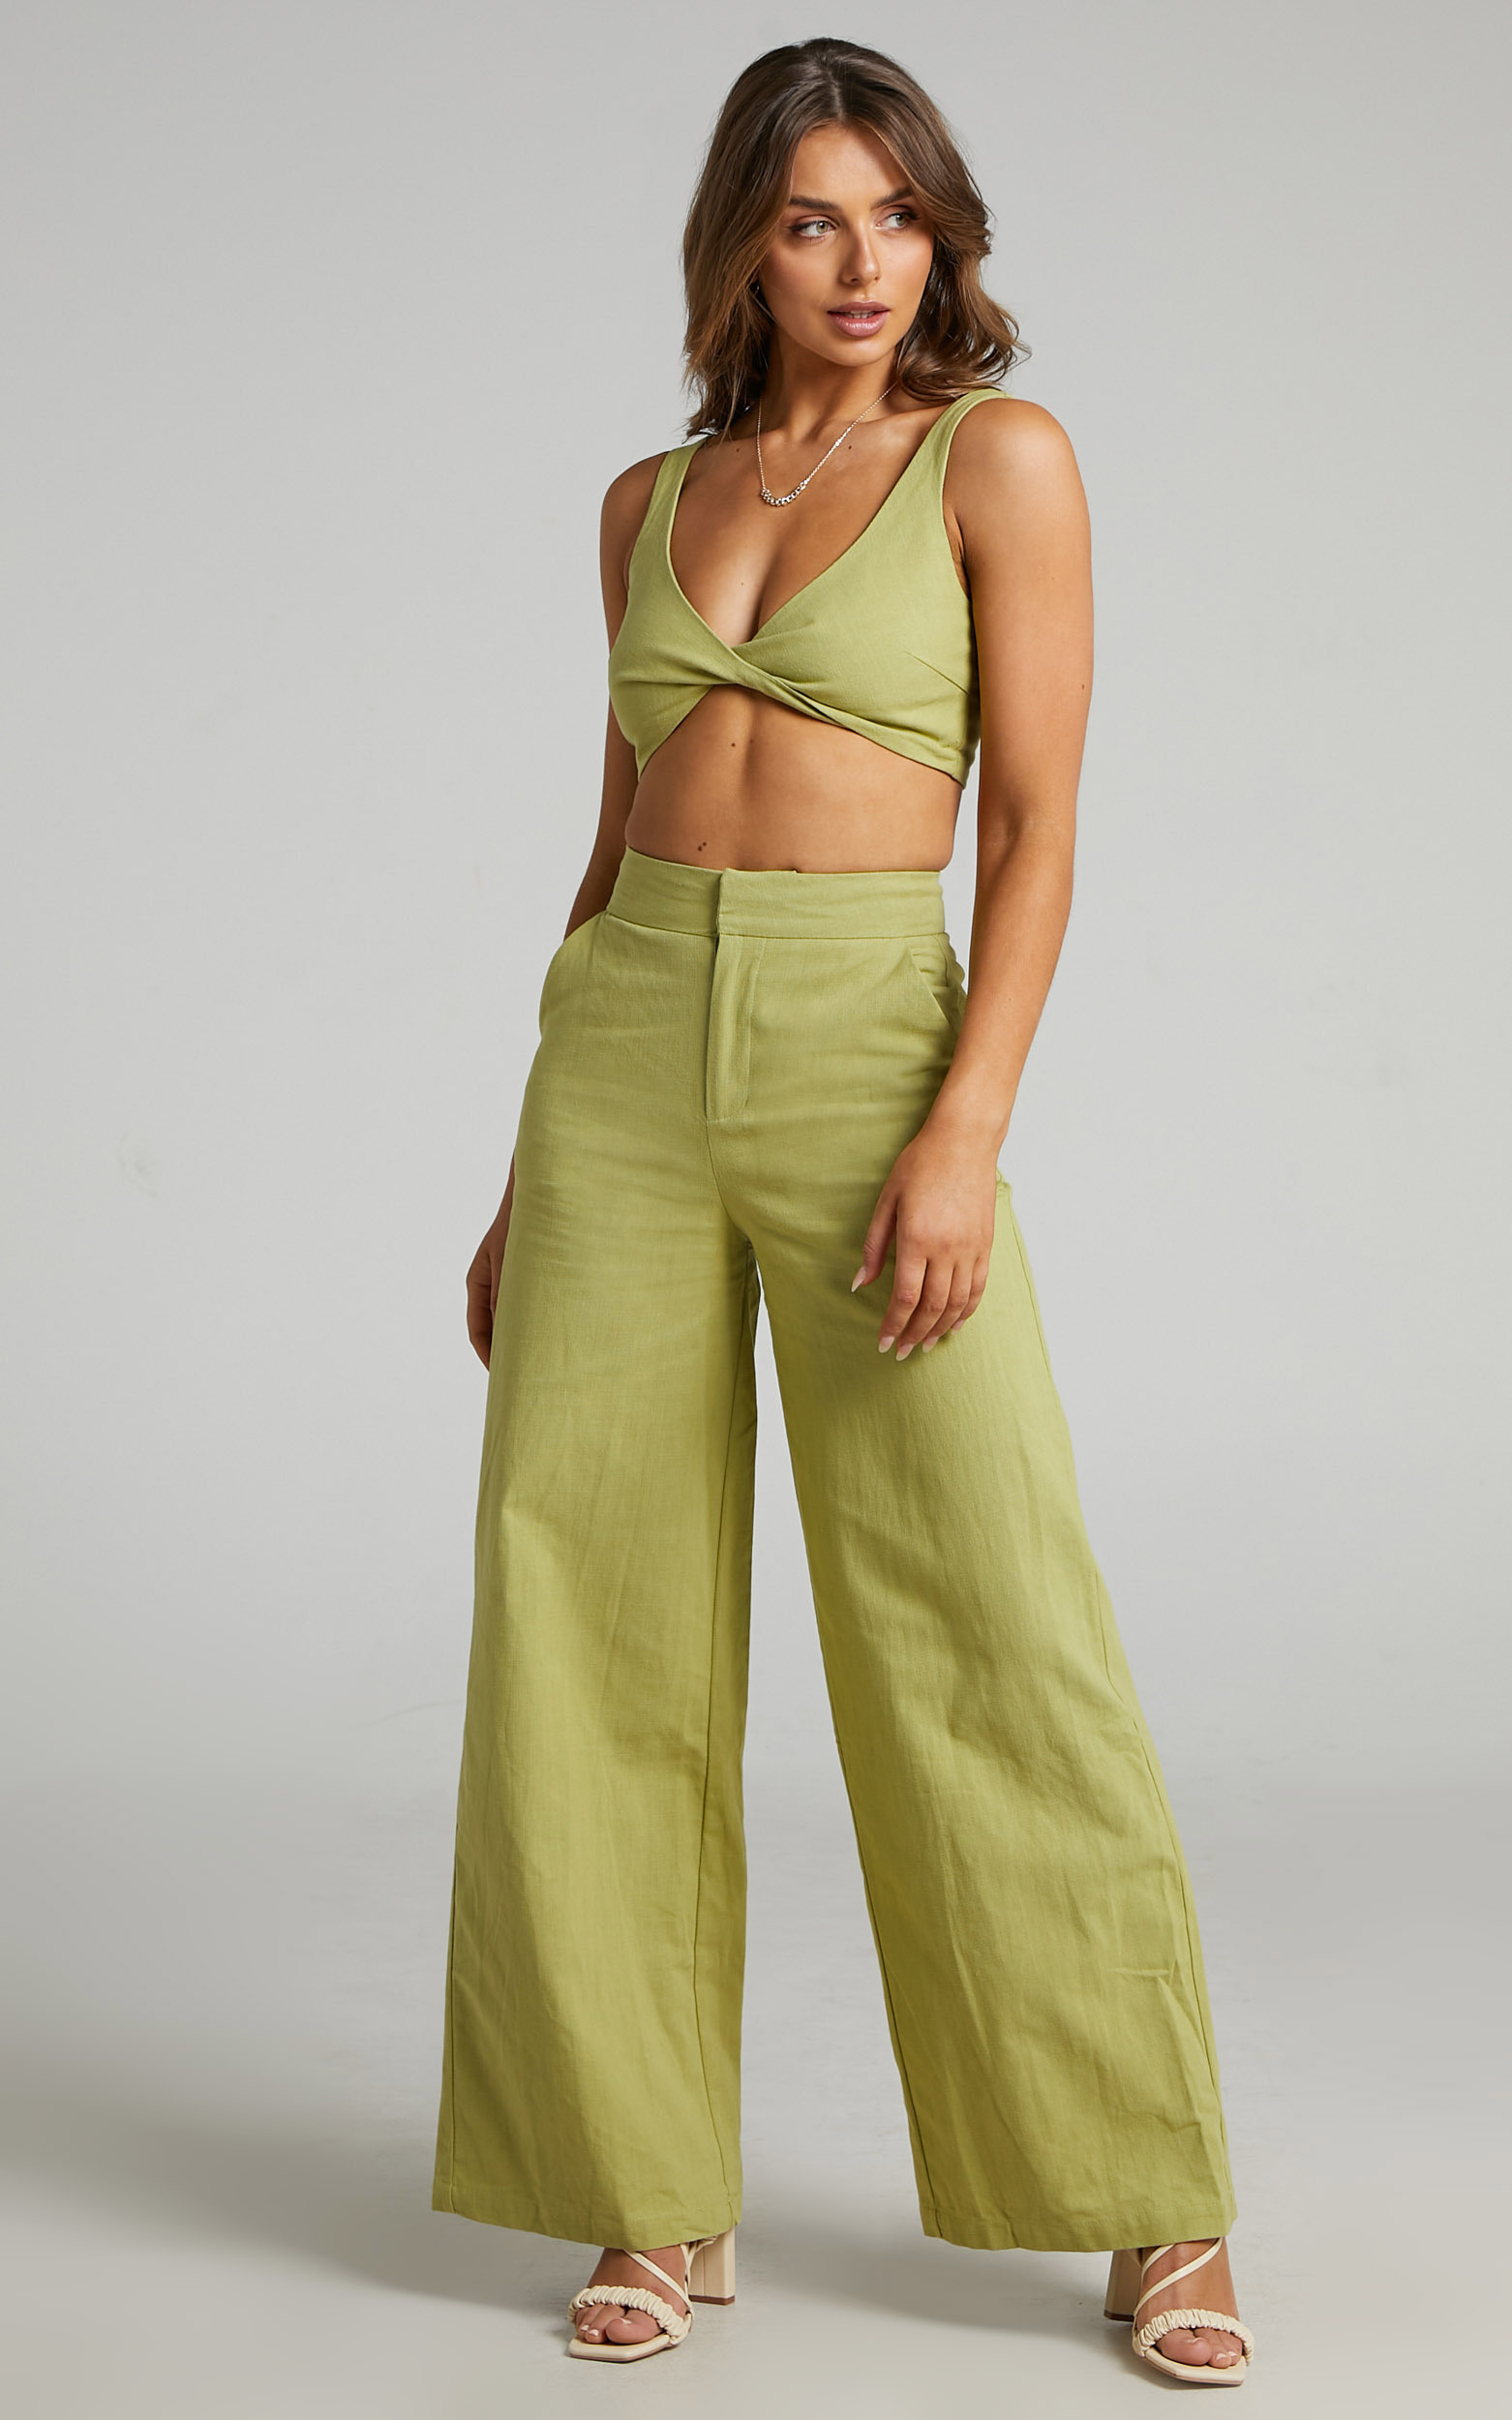 Kingston Twist Front Twill Two Piece Set in Green - 04, GRN3, hi-res image number null